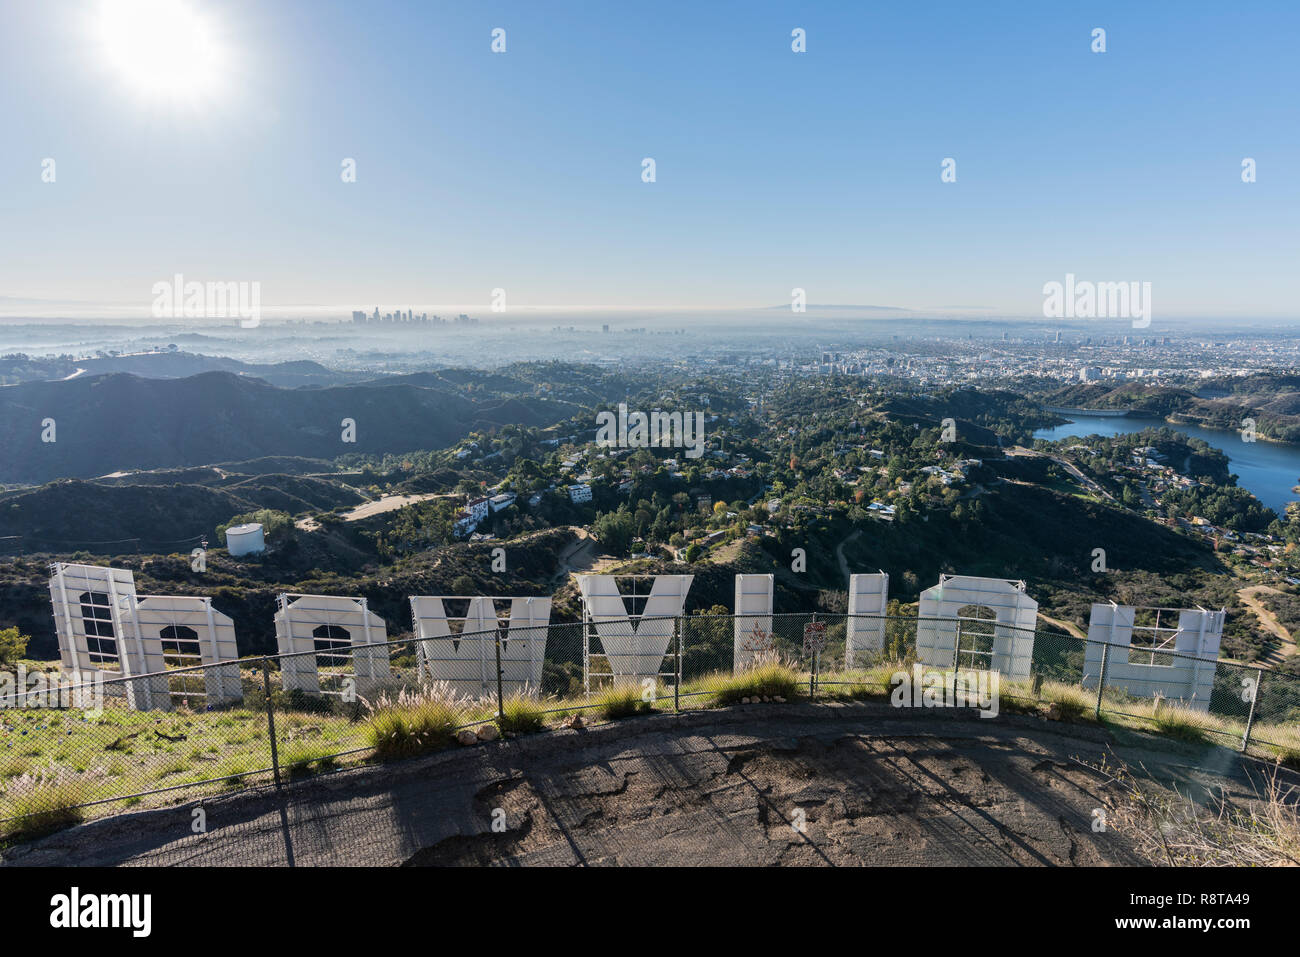 Los Angeles, California, USA - December 13, 2018:  Sunny morning cityscape view from behind the Hollywood sign in popular Griffith Park. Stock Photo